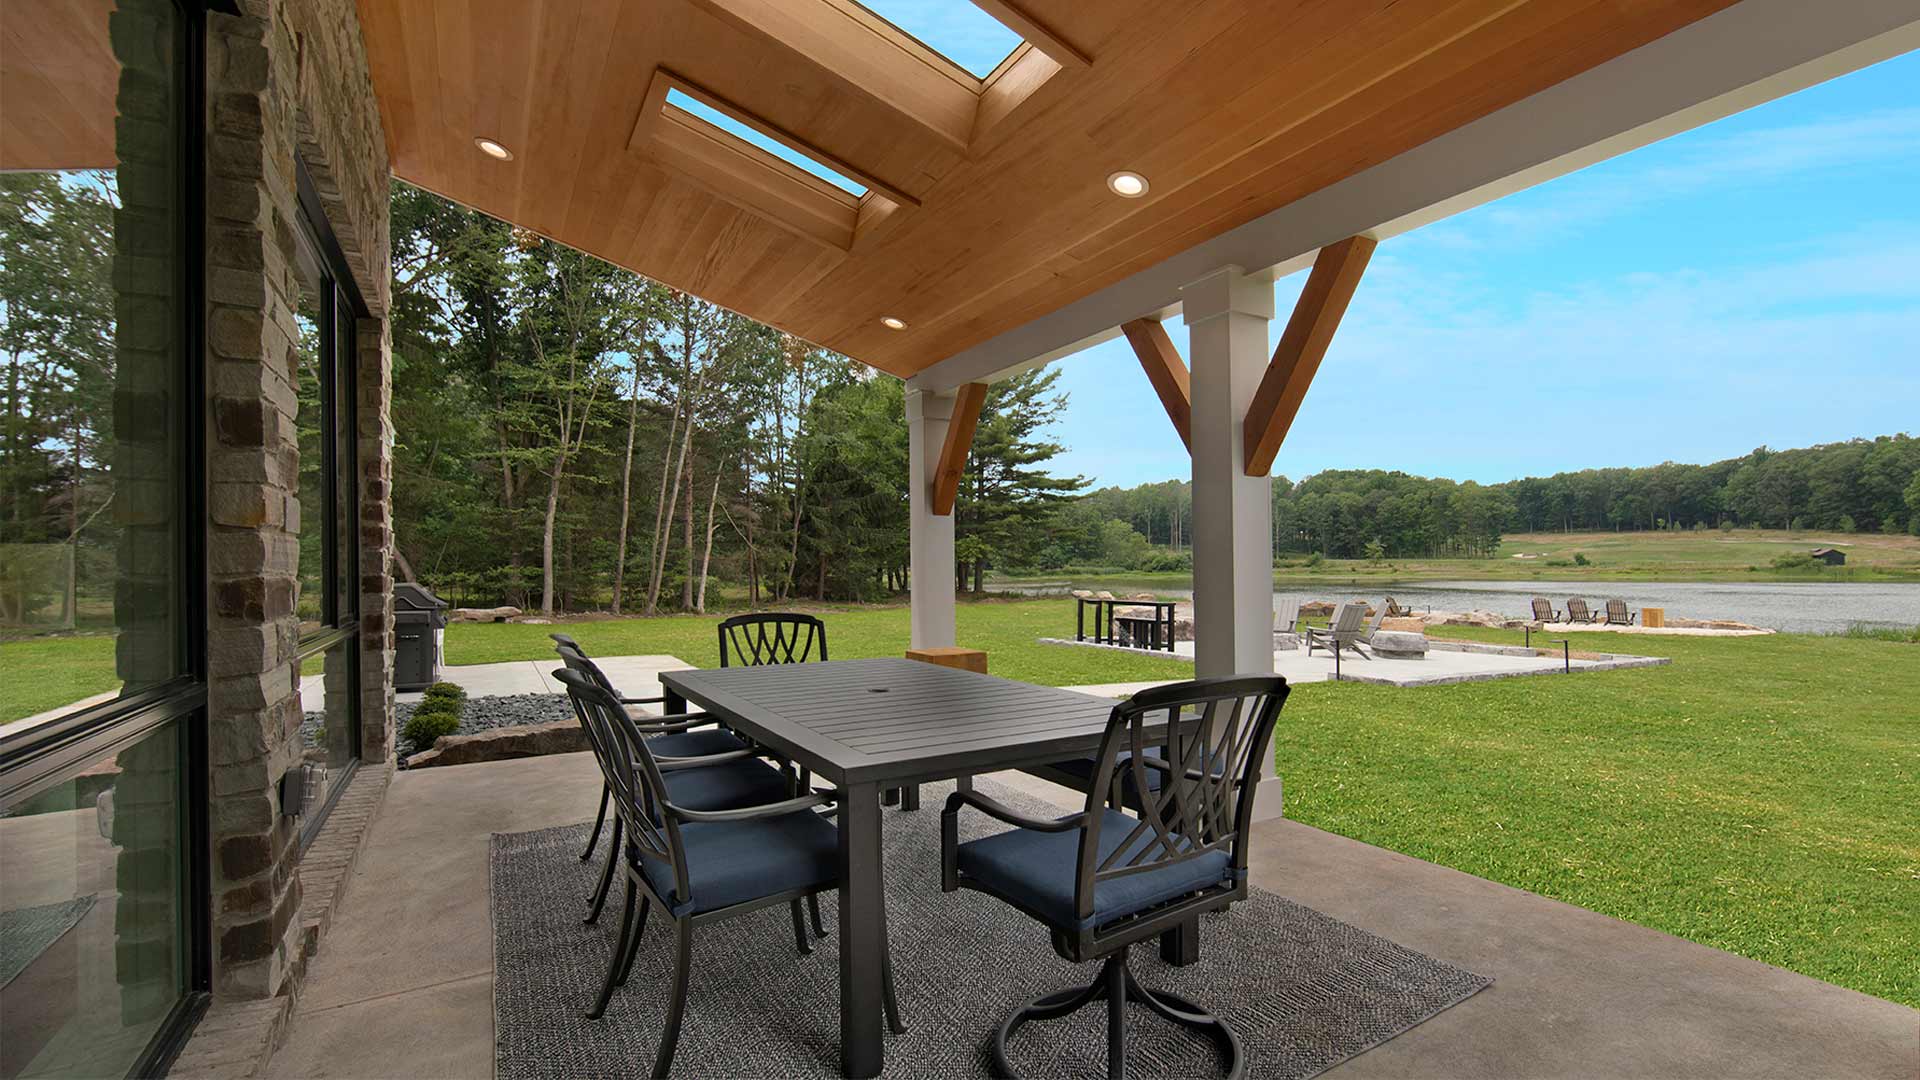 exterior shot of the patio with a table and chairs. There is a covering over the patio and a view of the lake